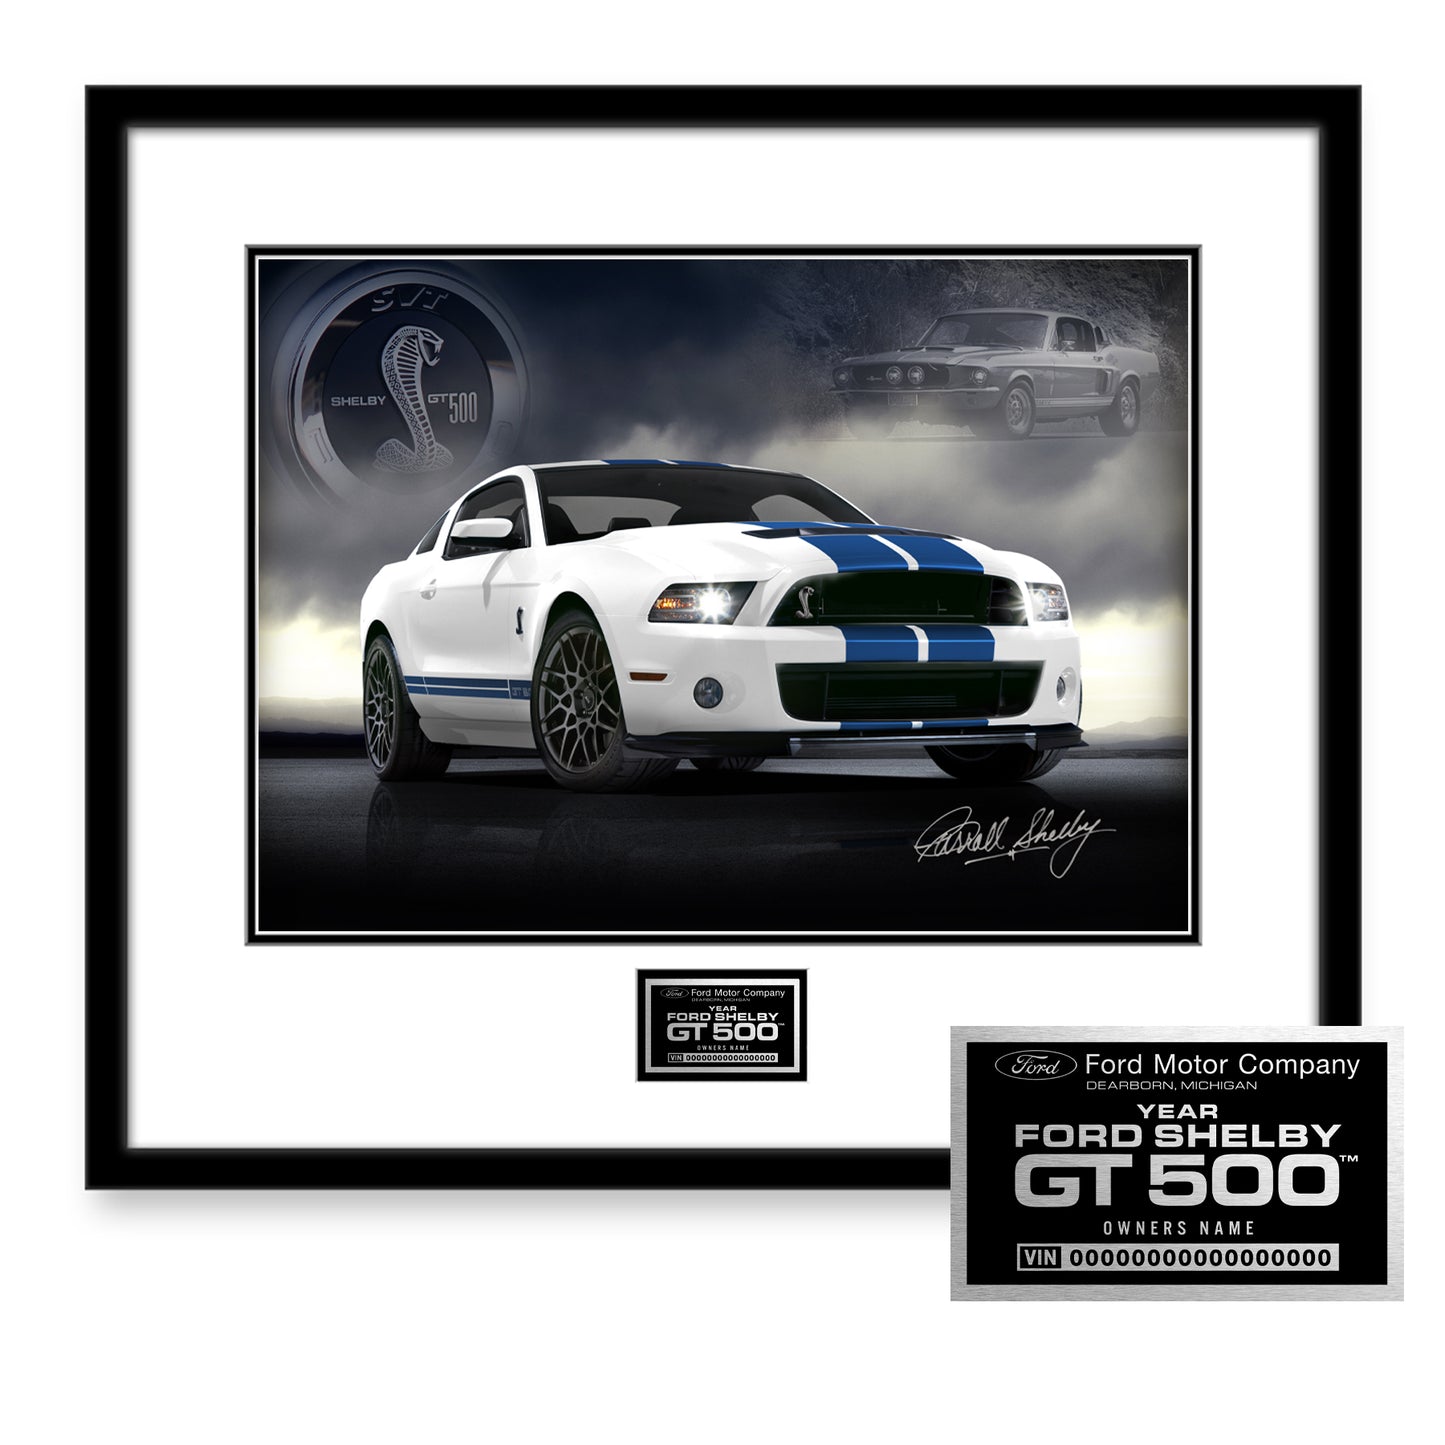 BUILD MY 2013-2014 Shelby GT500 OWNERS EDITION